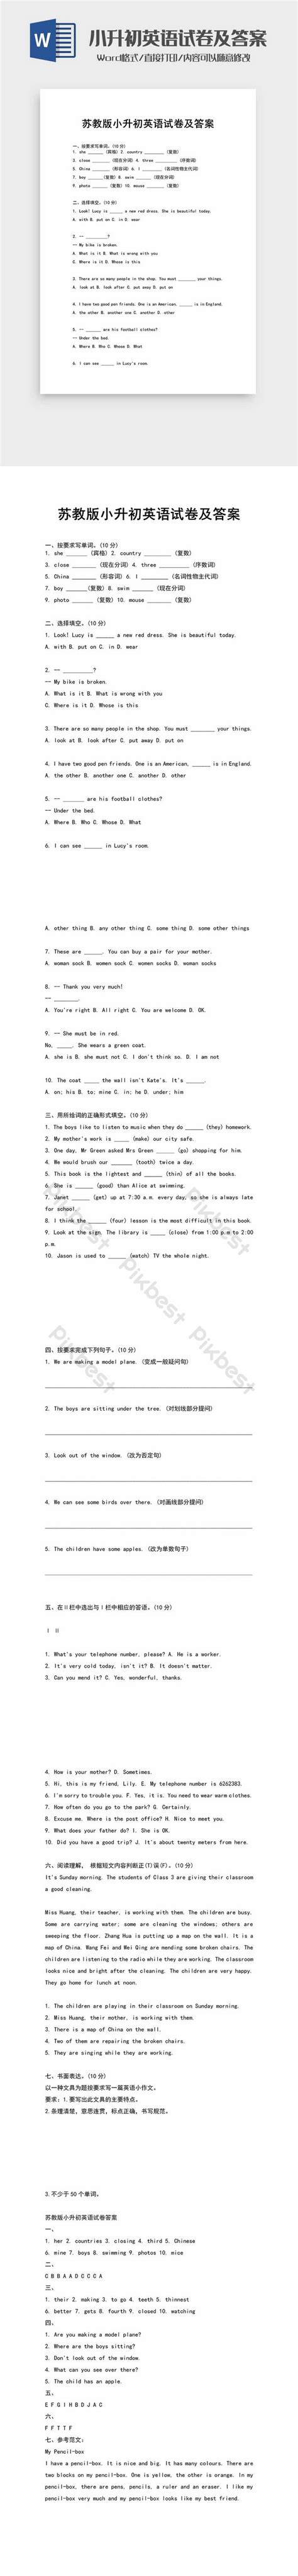 Xiaoshengchu English Test Questions And Answers Word Template Word ...